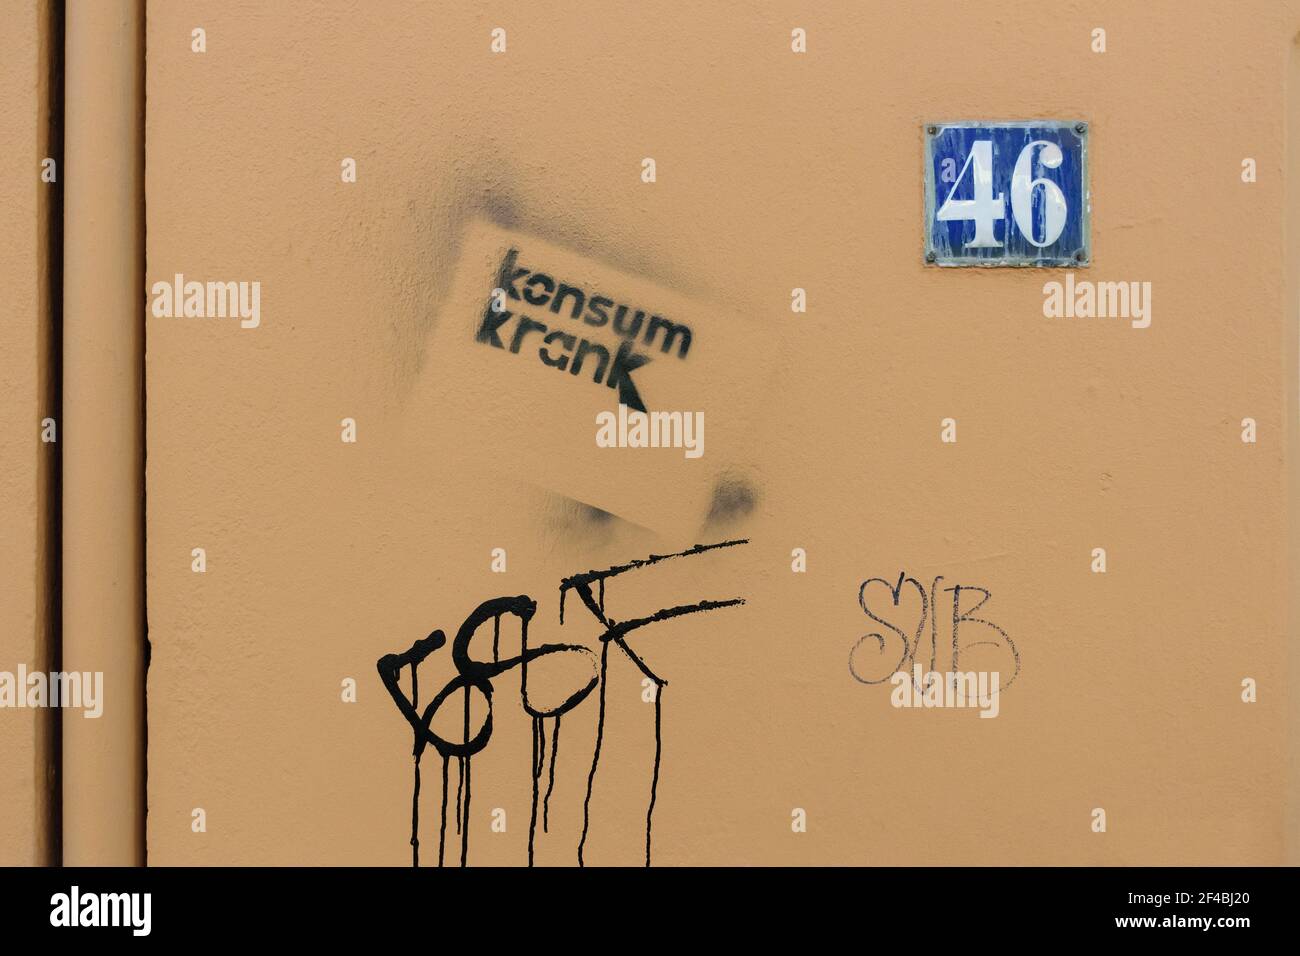 Stencil graffiti - consumption sick (konsum krank) - on a beige painted house wall with the house number 46, Hamburg, Germany. Stock Photo